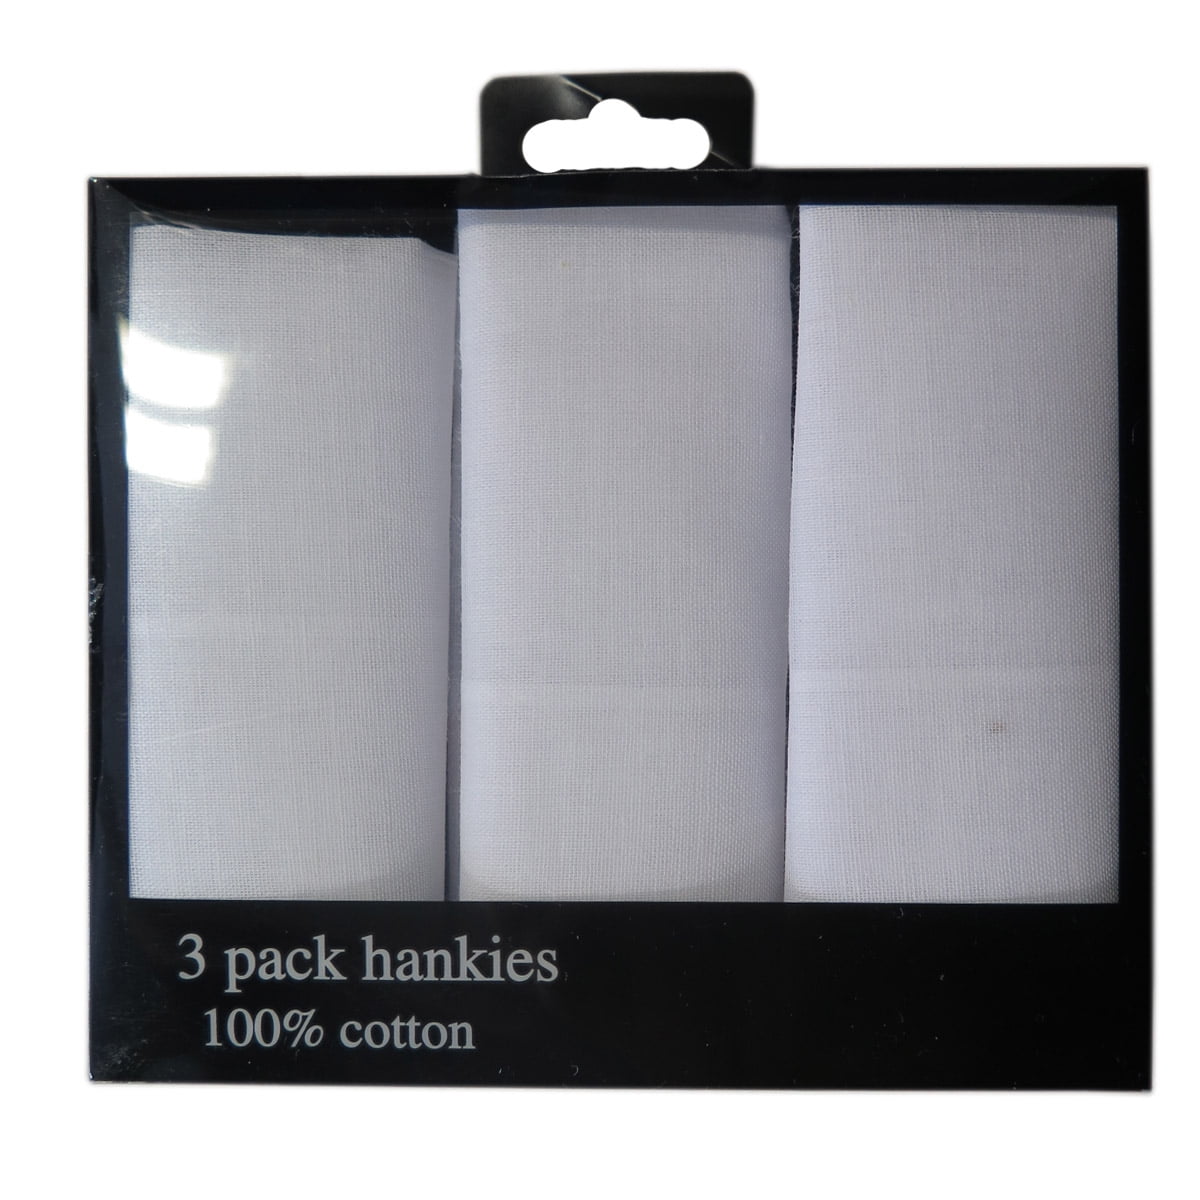 Mens white Grey and Chequered handkerchiefs 3-pack 100% cotton. 